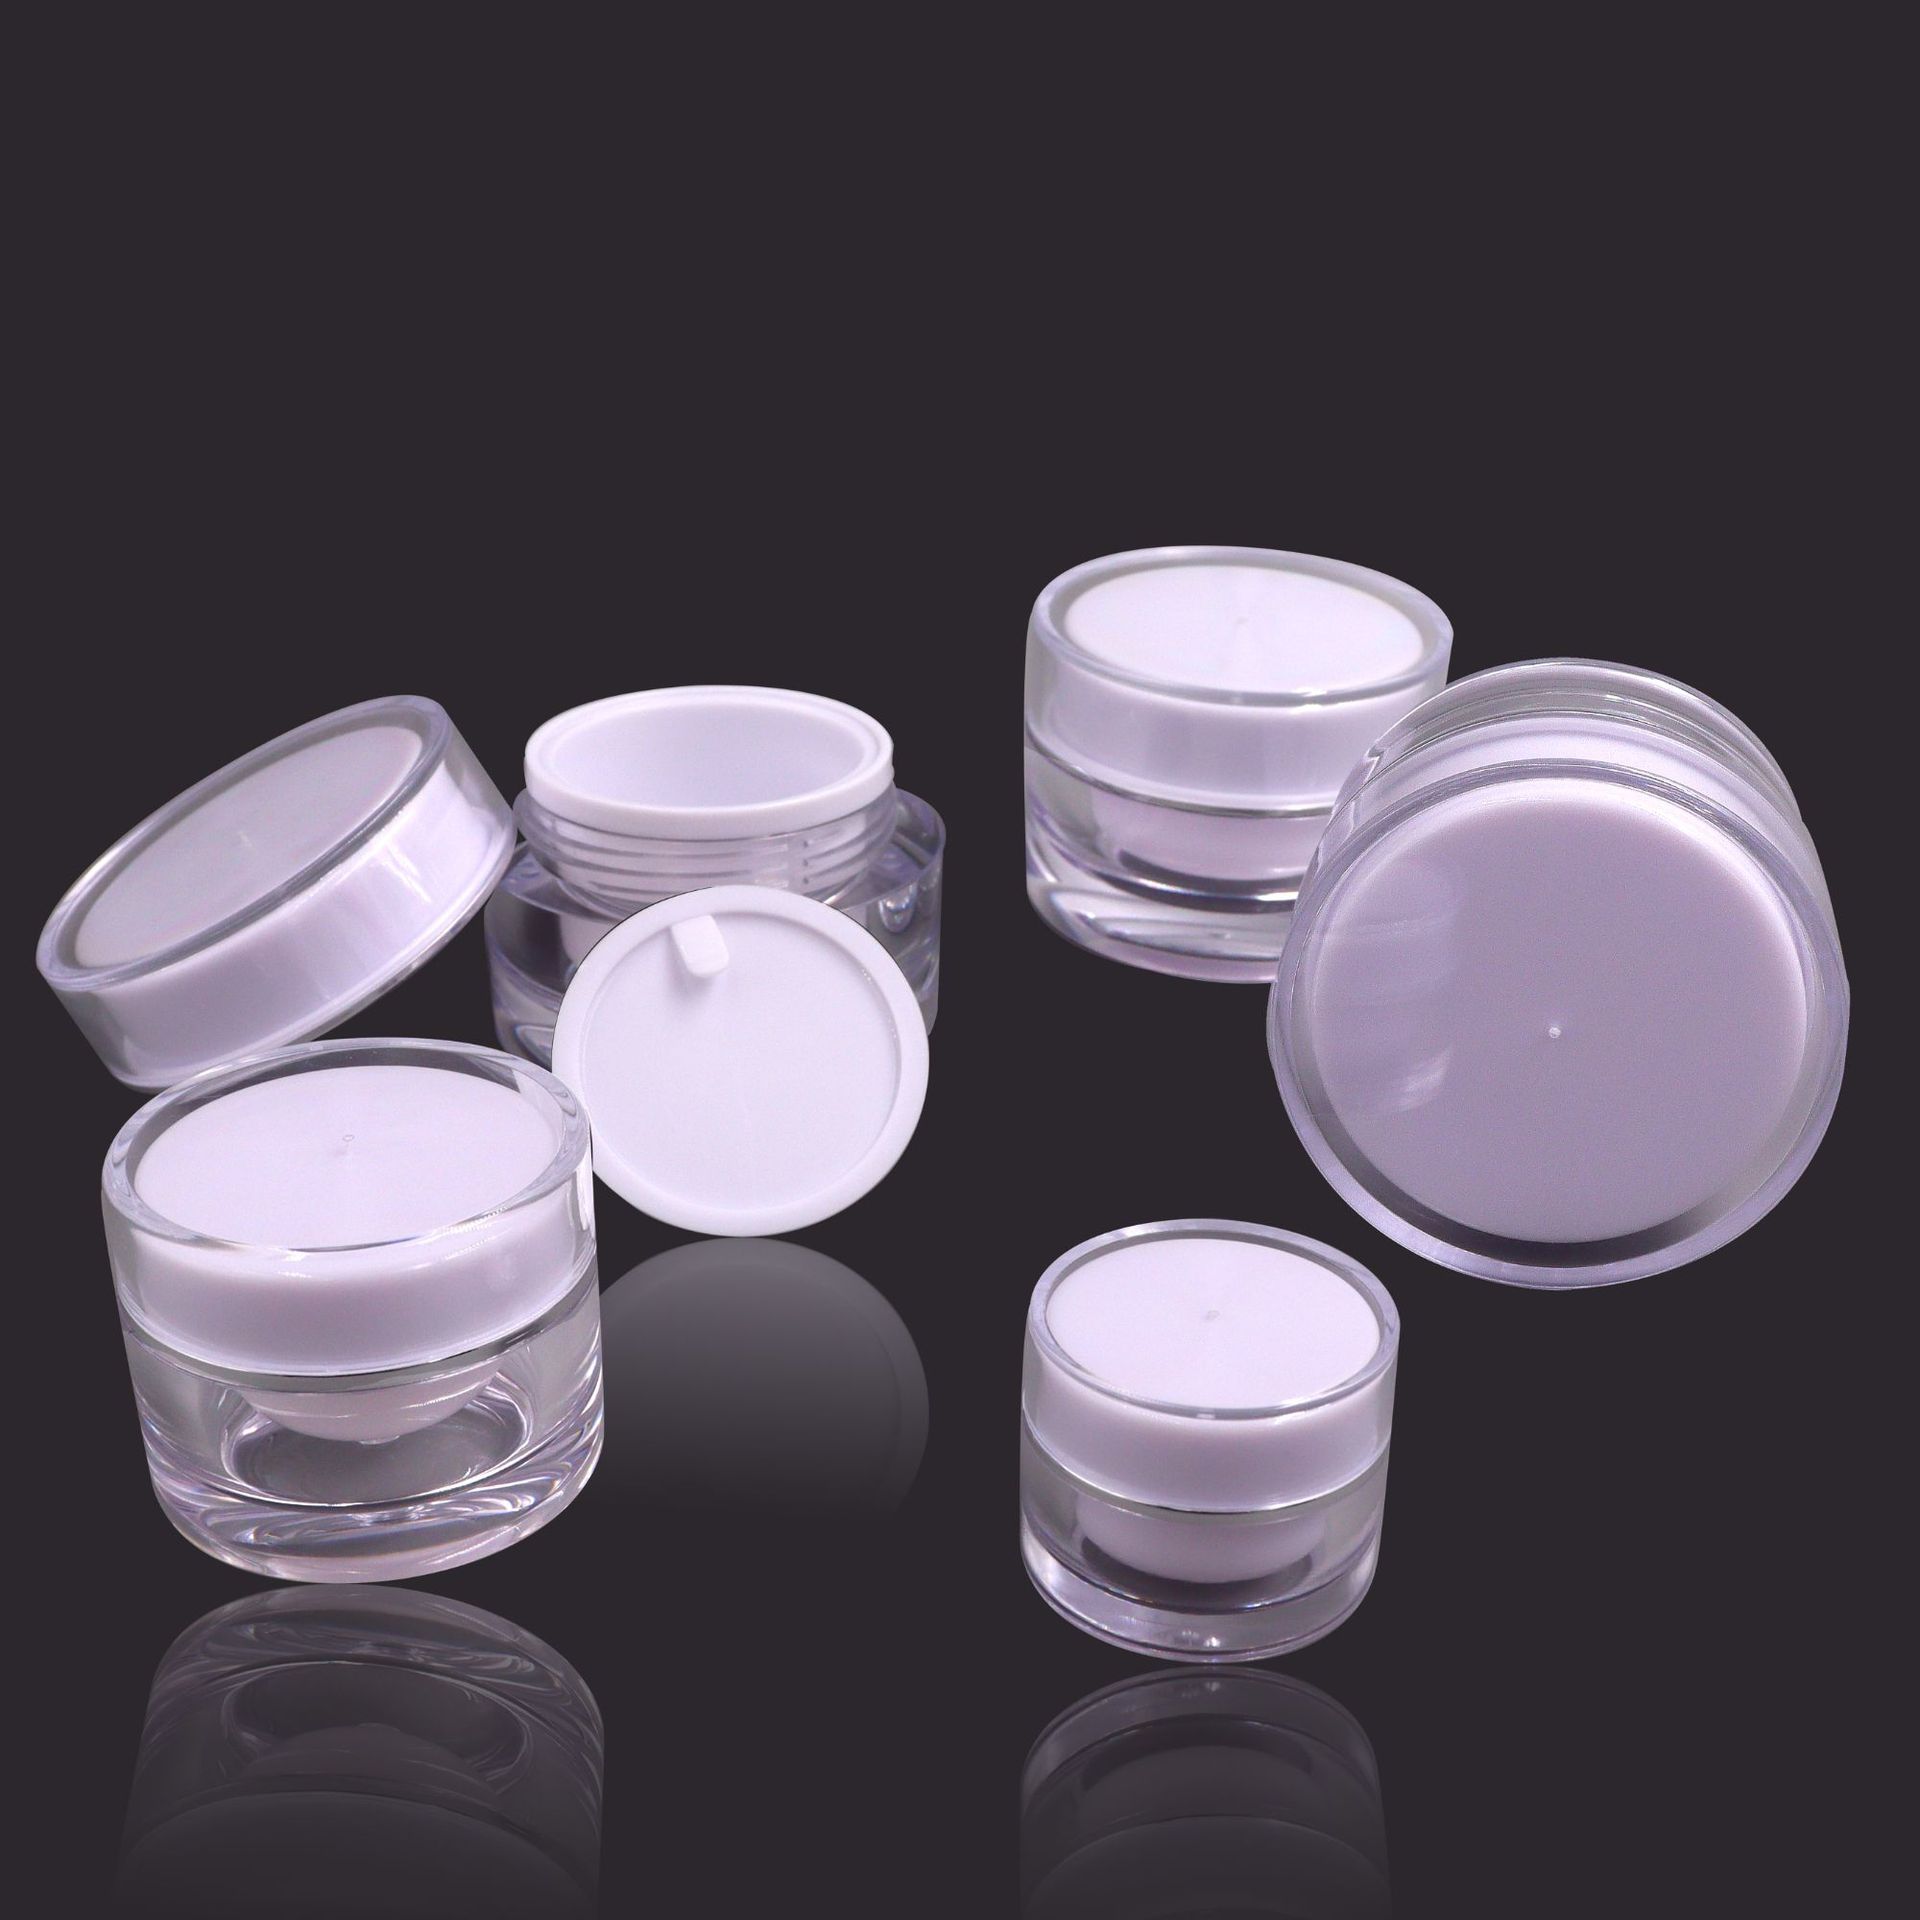 Produkt 5G 10G 15G 20G 30G Cream Jar PP PMMA Airless Refillable Cosmetic and Bottle With Pump Lids